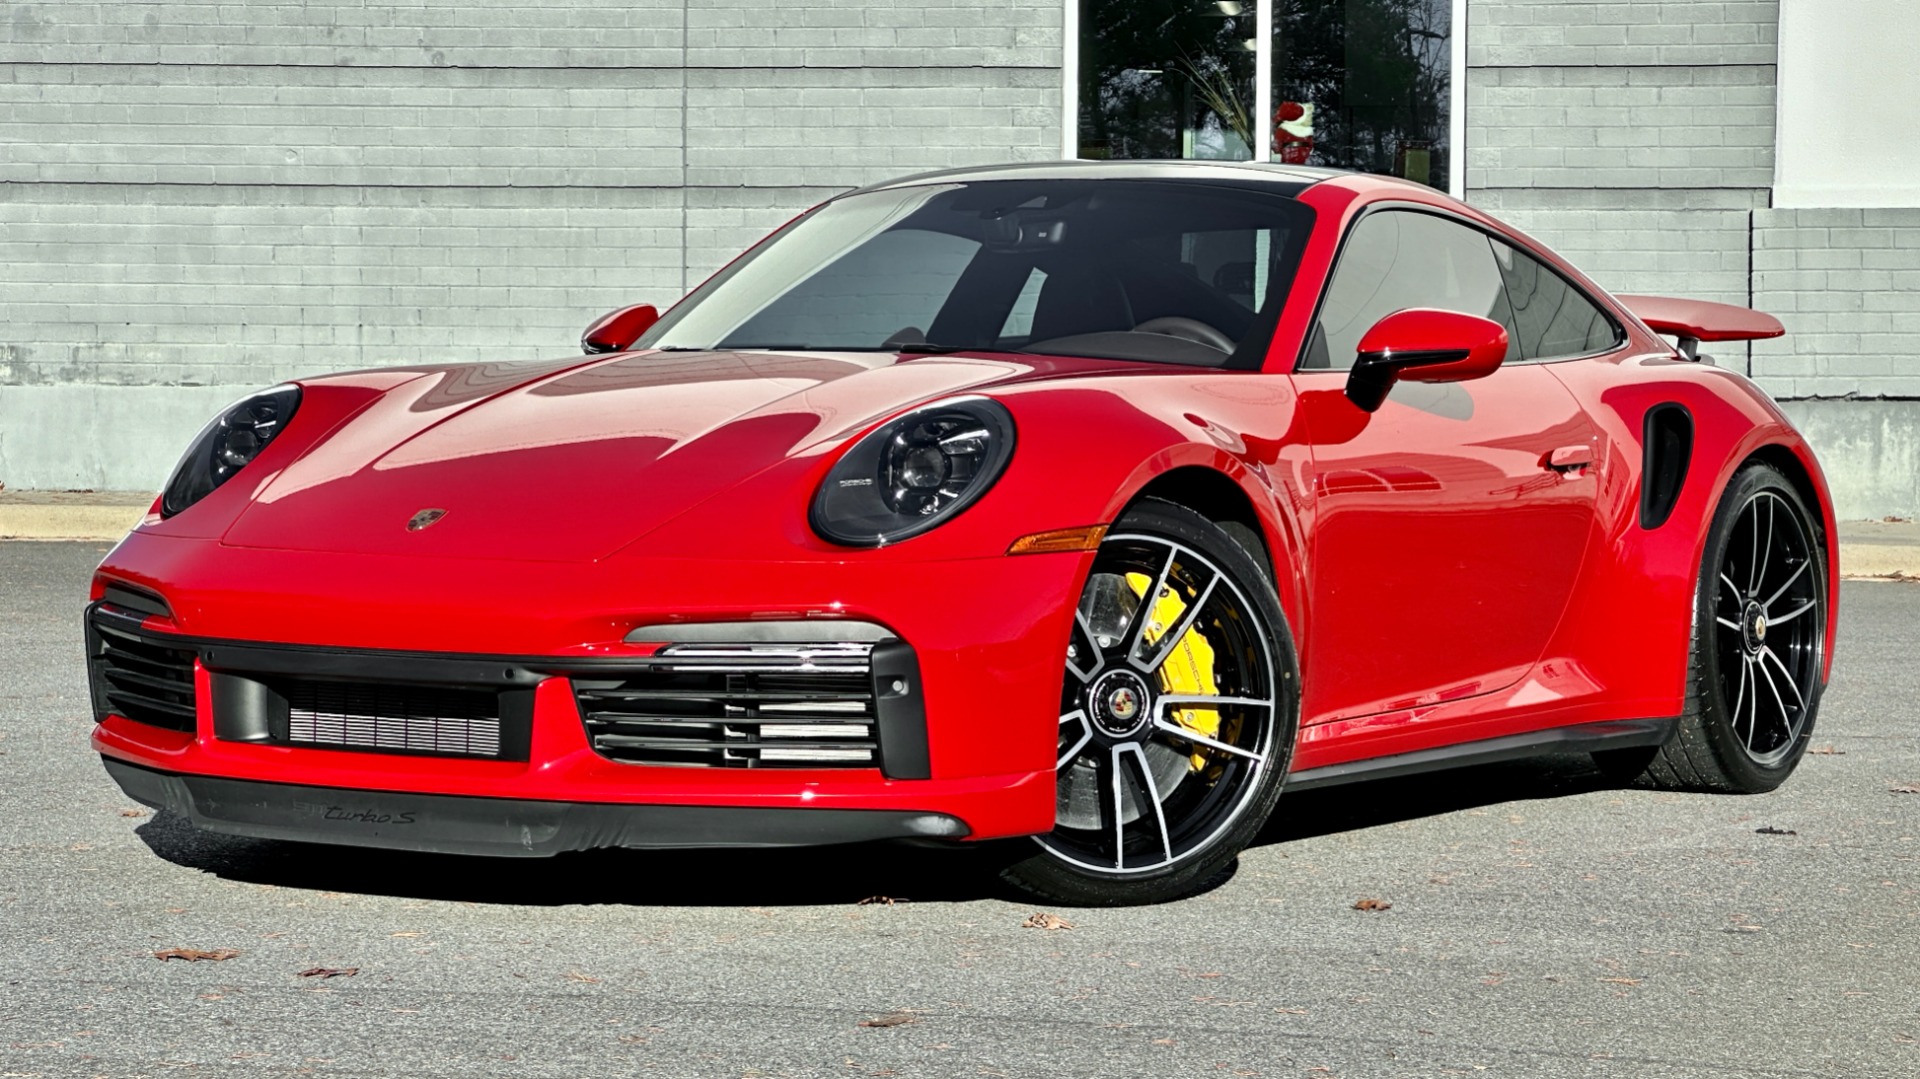 Used 2022 Porsche 911 Turbo S / PAINT PROTECTION / BURMESTER / SPORT EXHAUST / FRONT LIFT for sale $253,000 at Formula Imports in Charlotte NC 28227 2